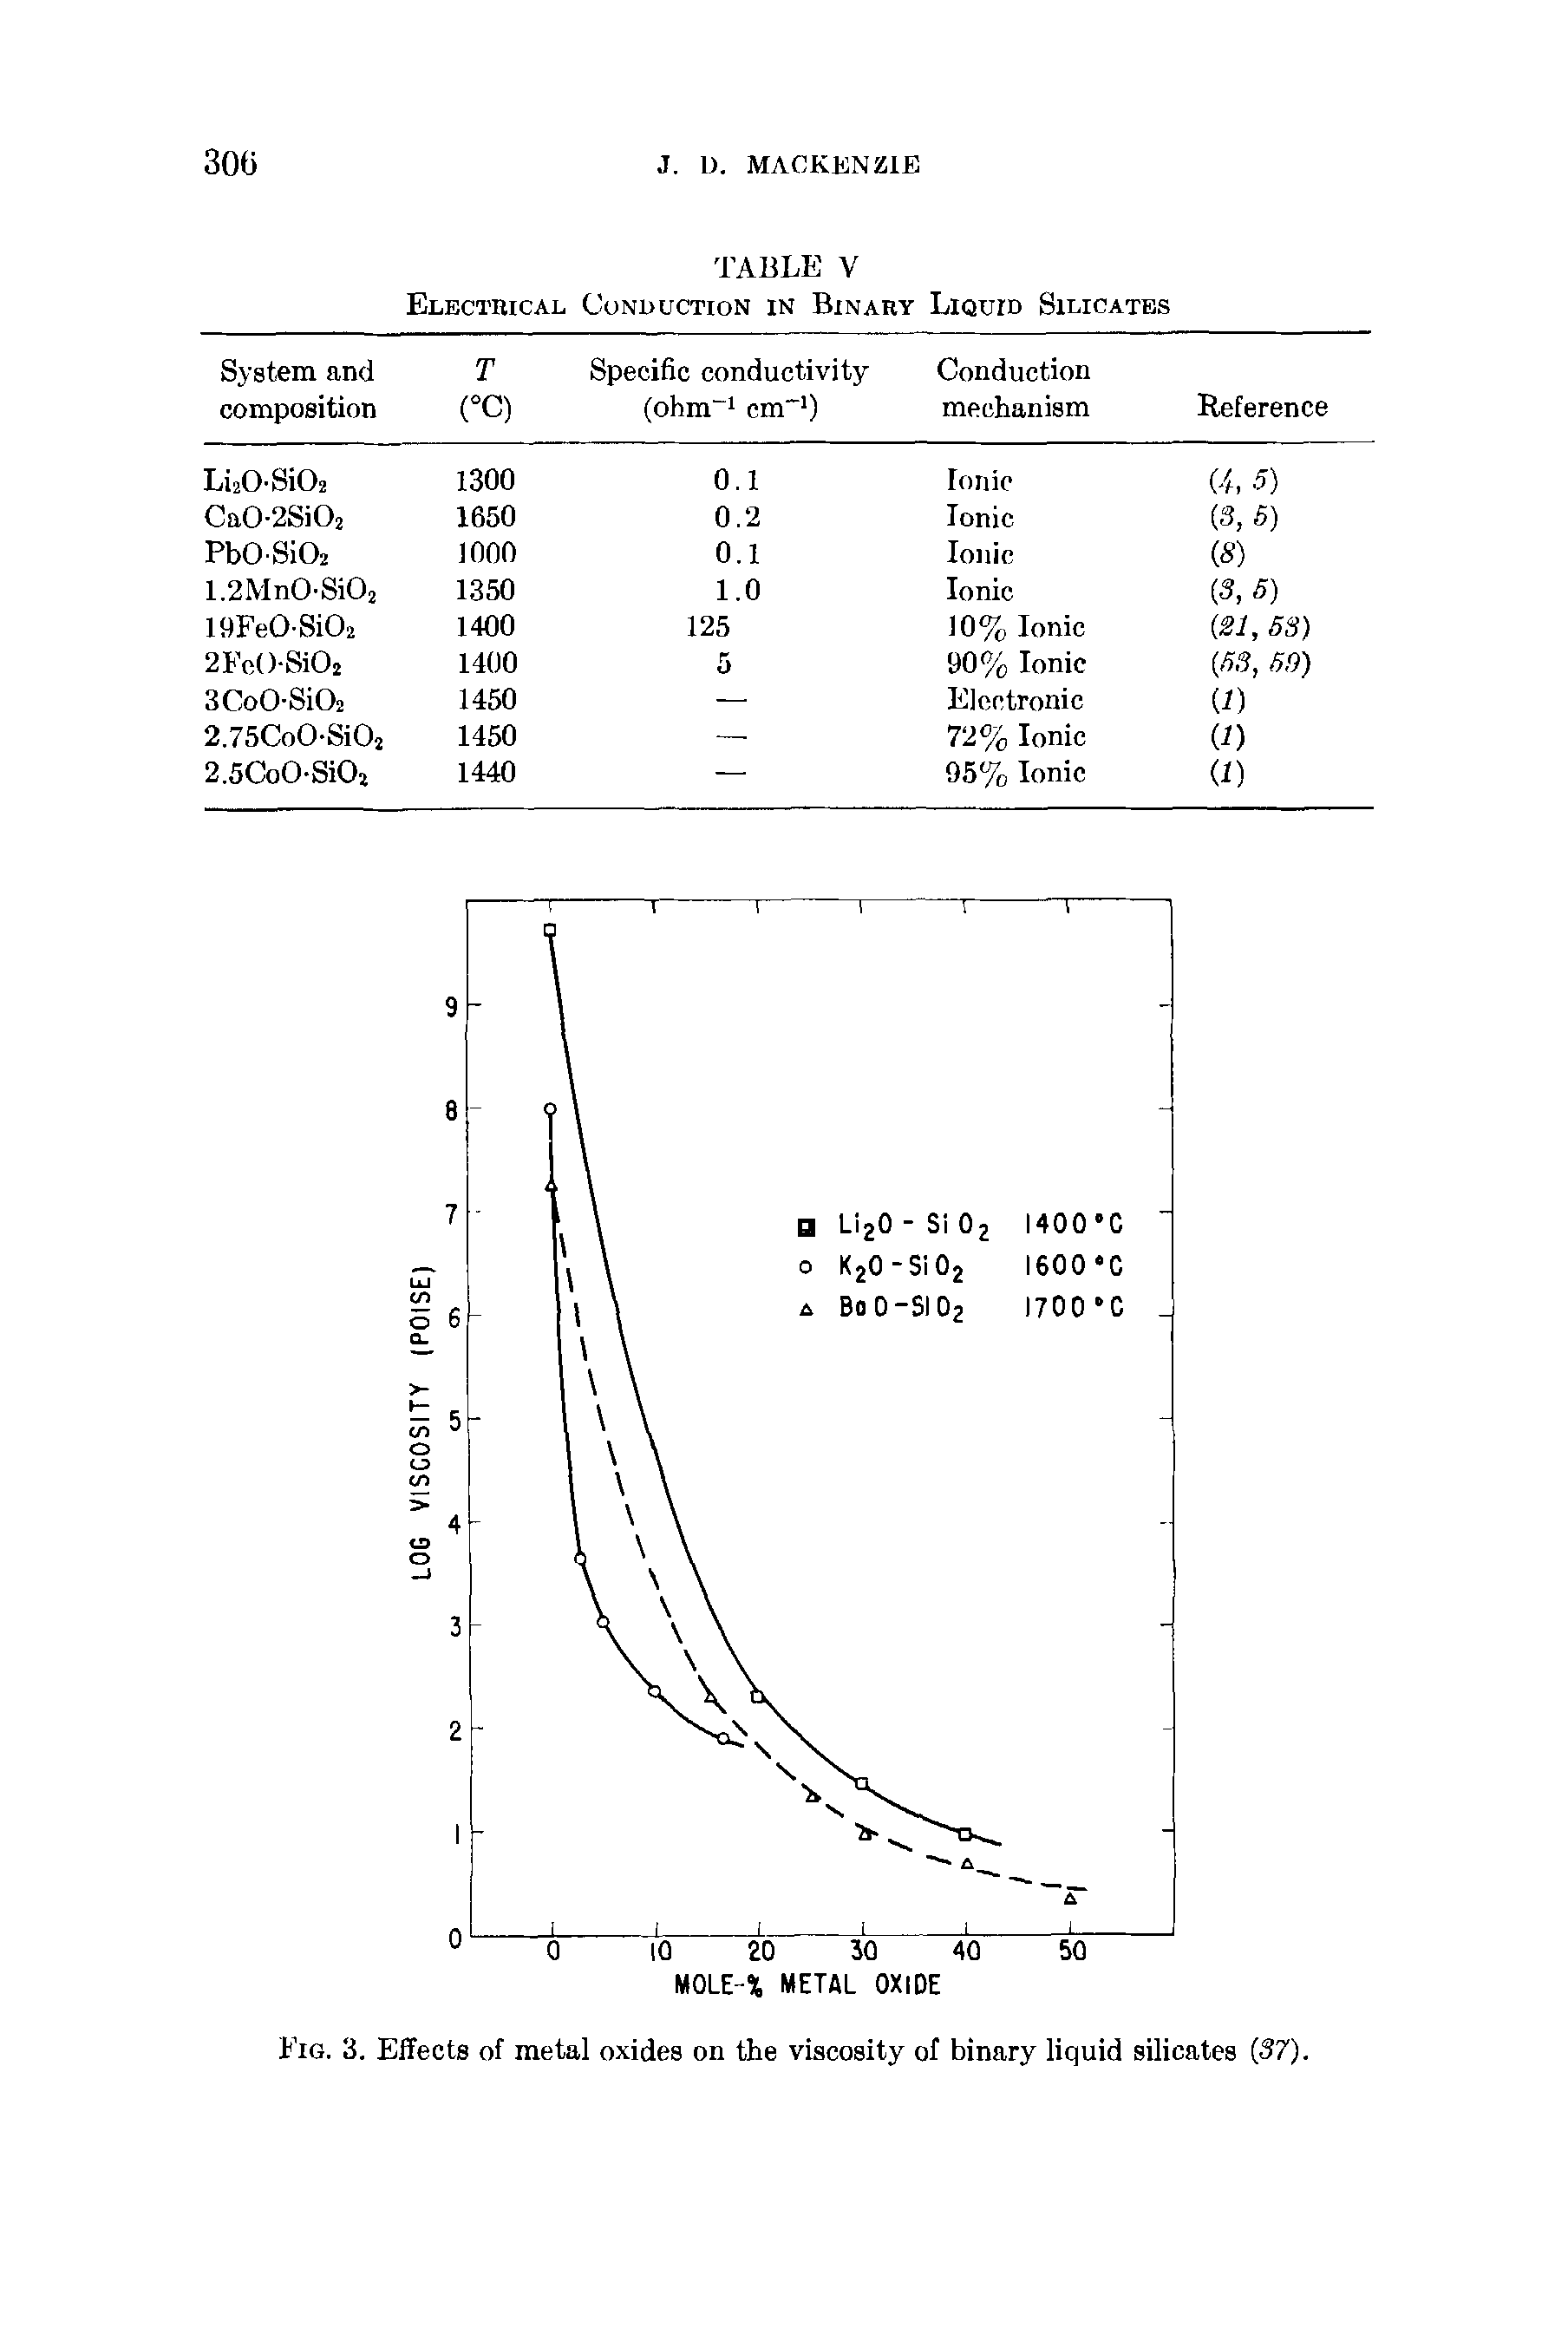 Fig. 3. Effects of metal oxides on the viscosity of binary liquid silicates 37).